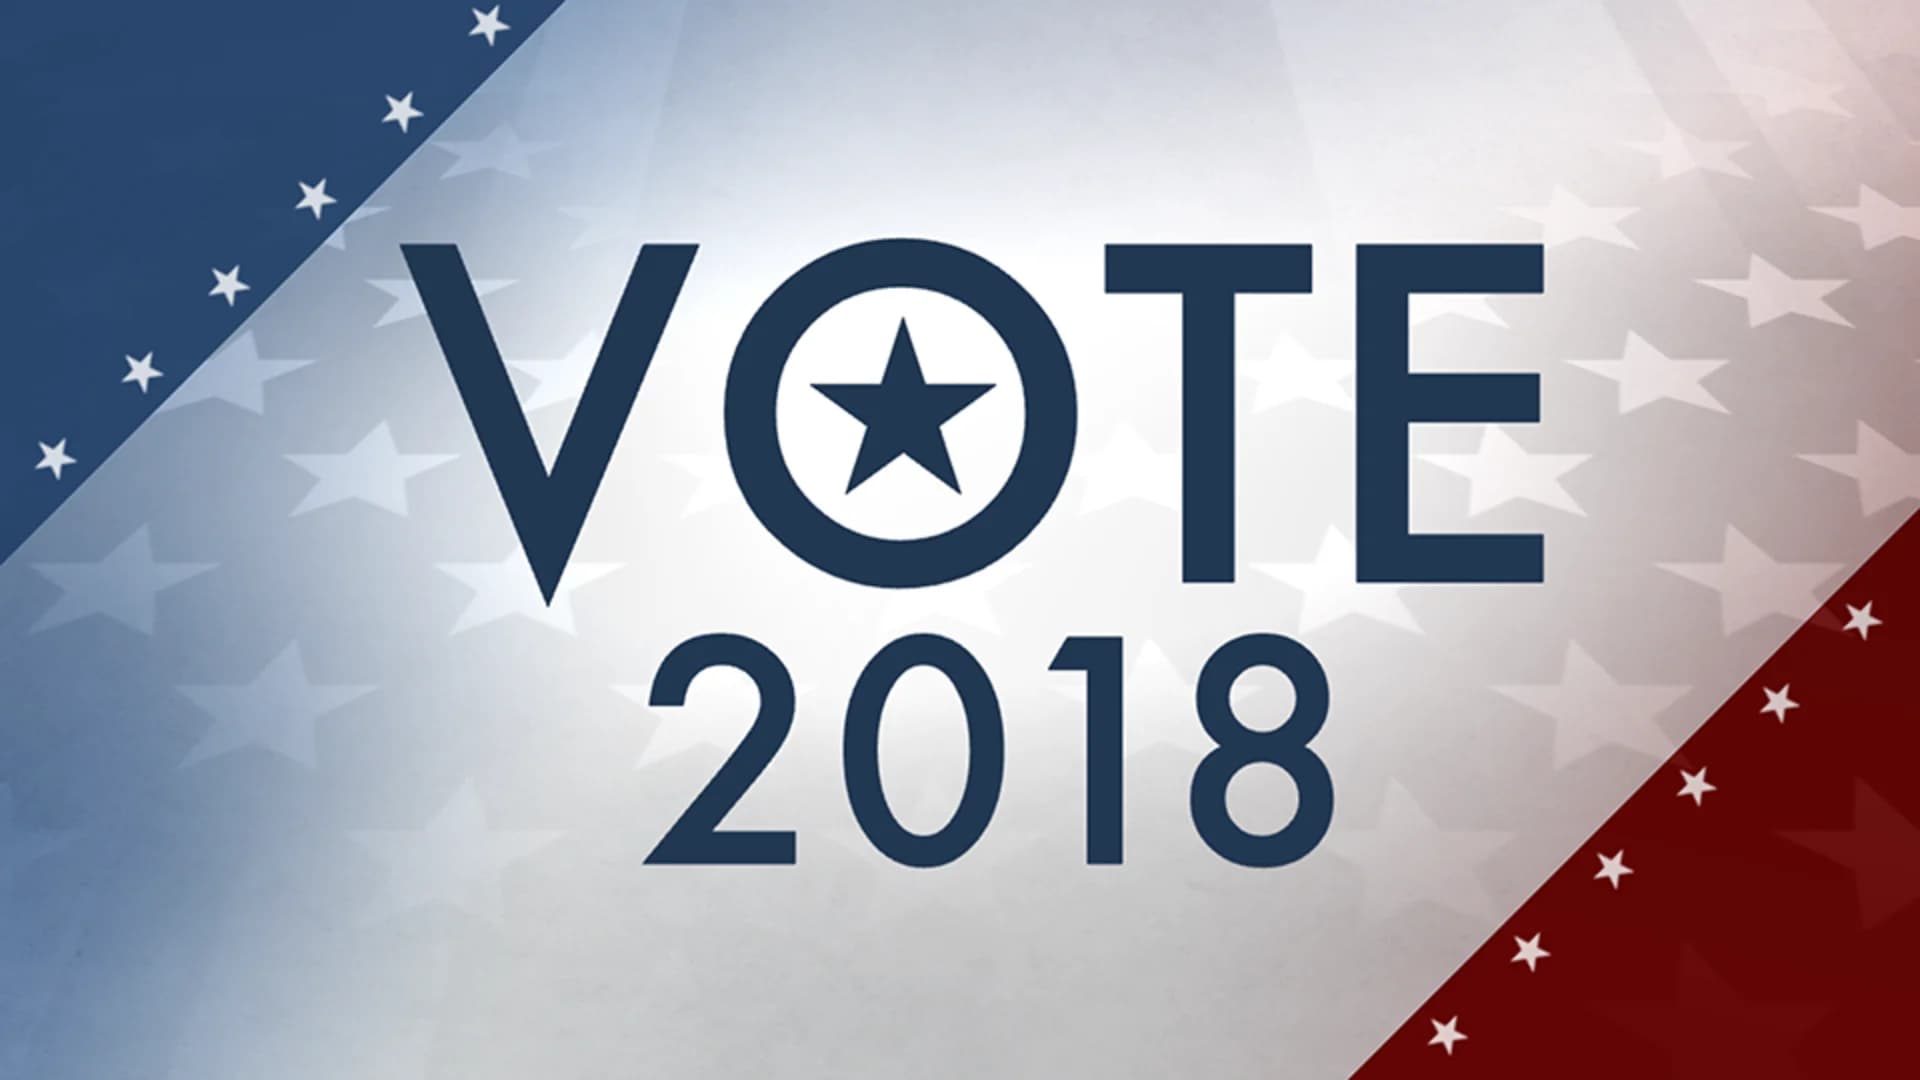 News 12 Special Election Results 2018